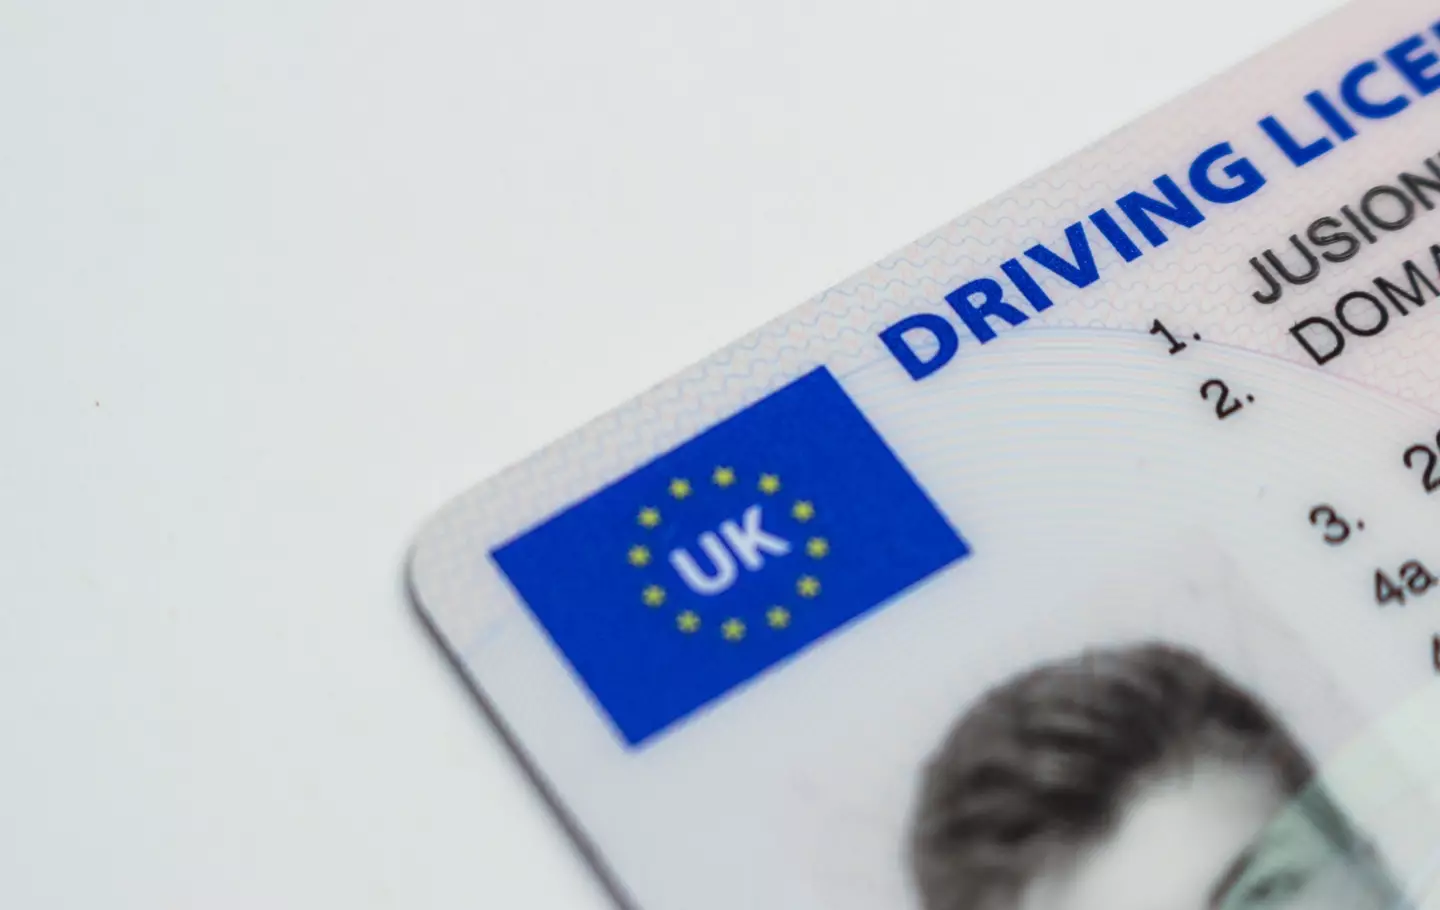 Your driving licence may have expired without you realising.